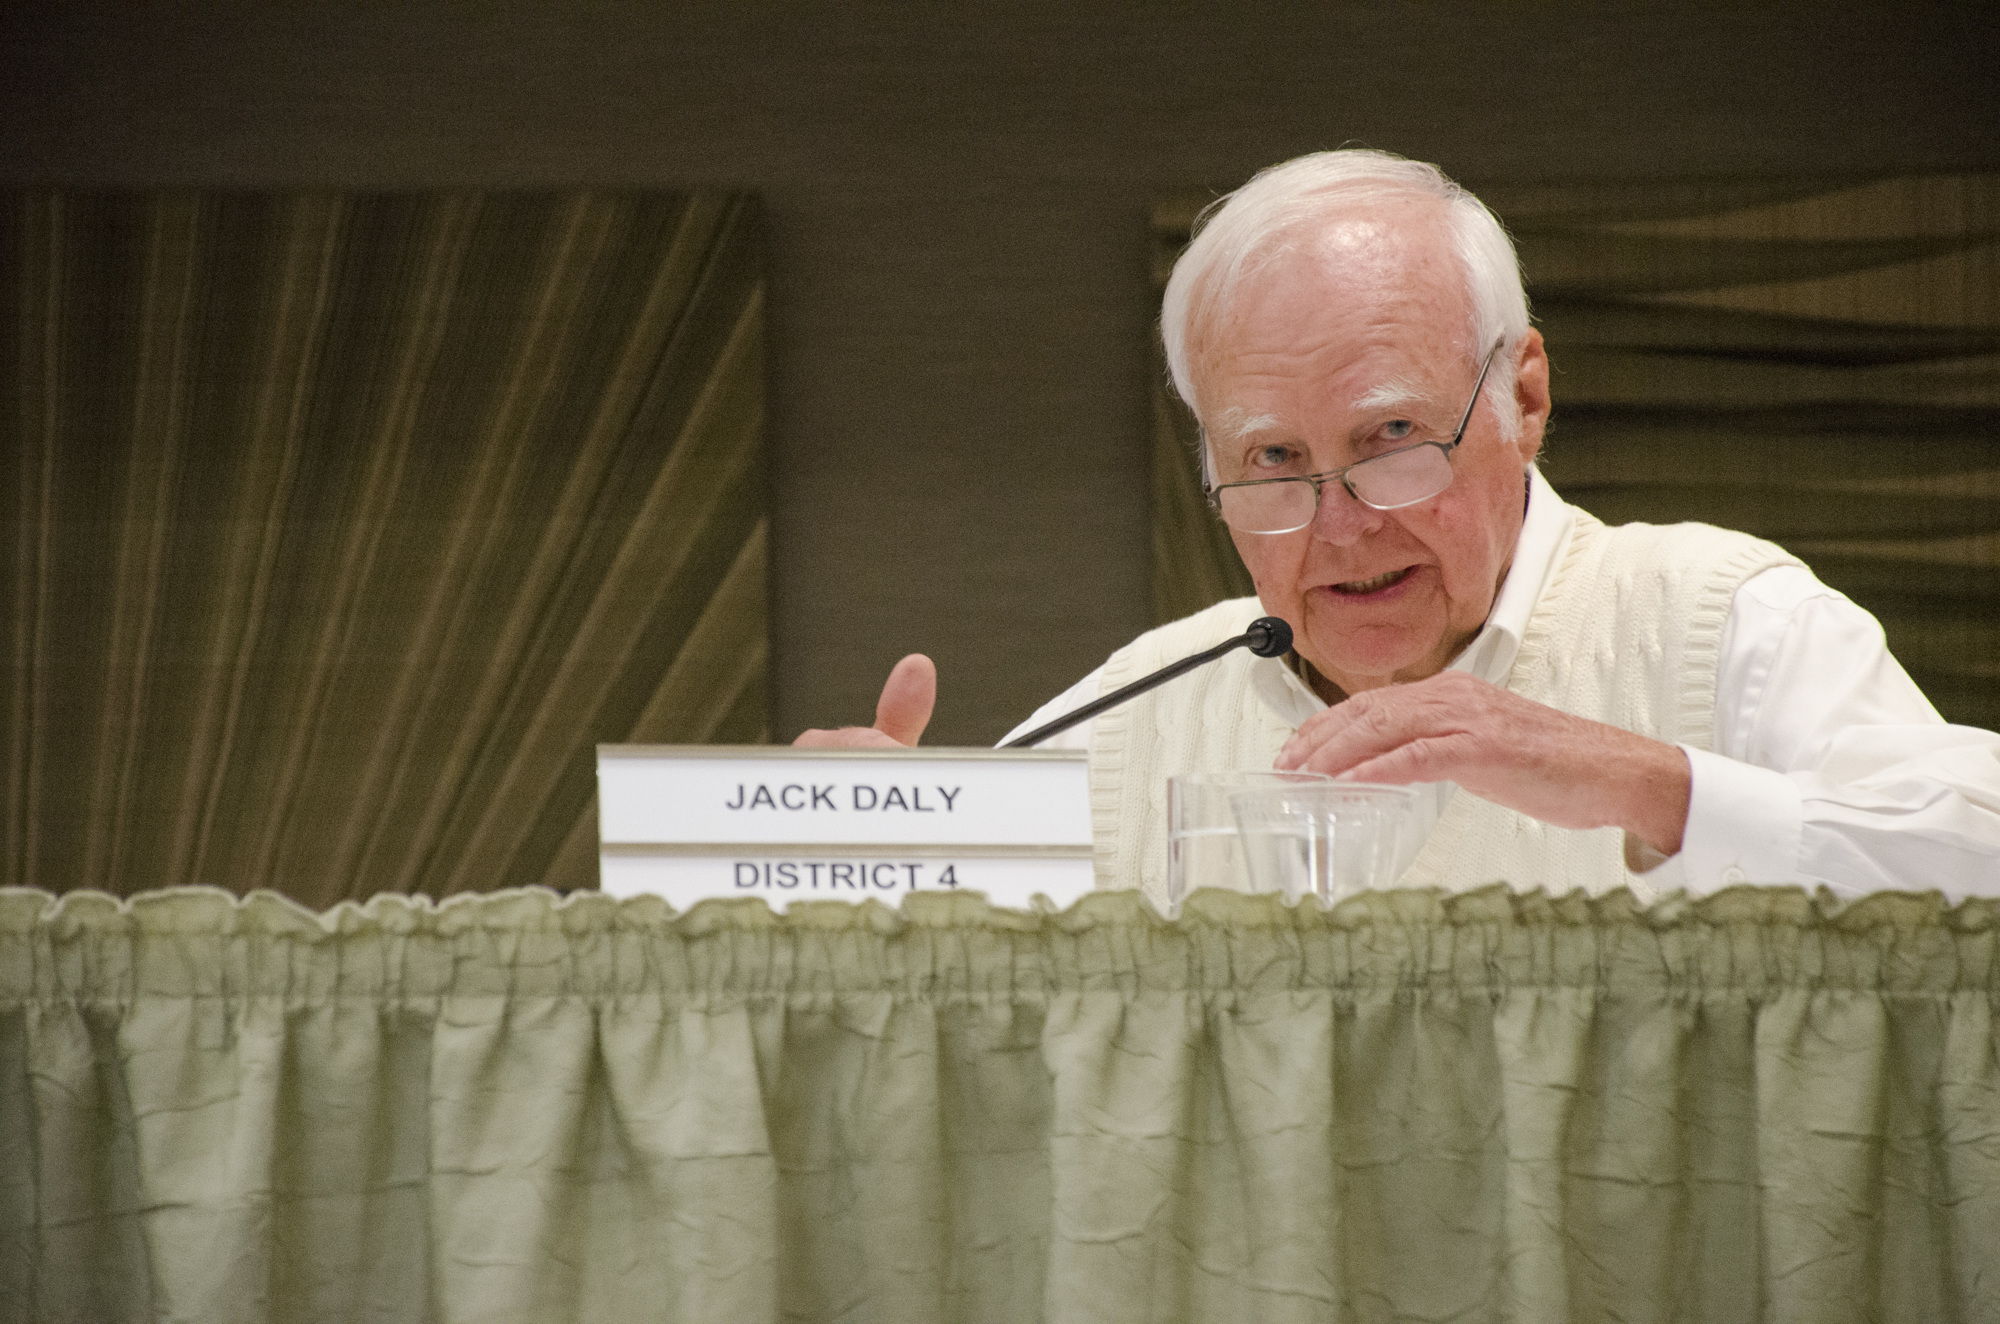 District 4 Commissioner Jack Daly said he's inclinded to deny Unicorp National Development Inc.'s proposal to change town zoning codes